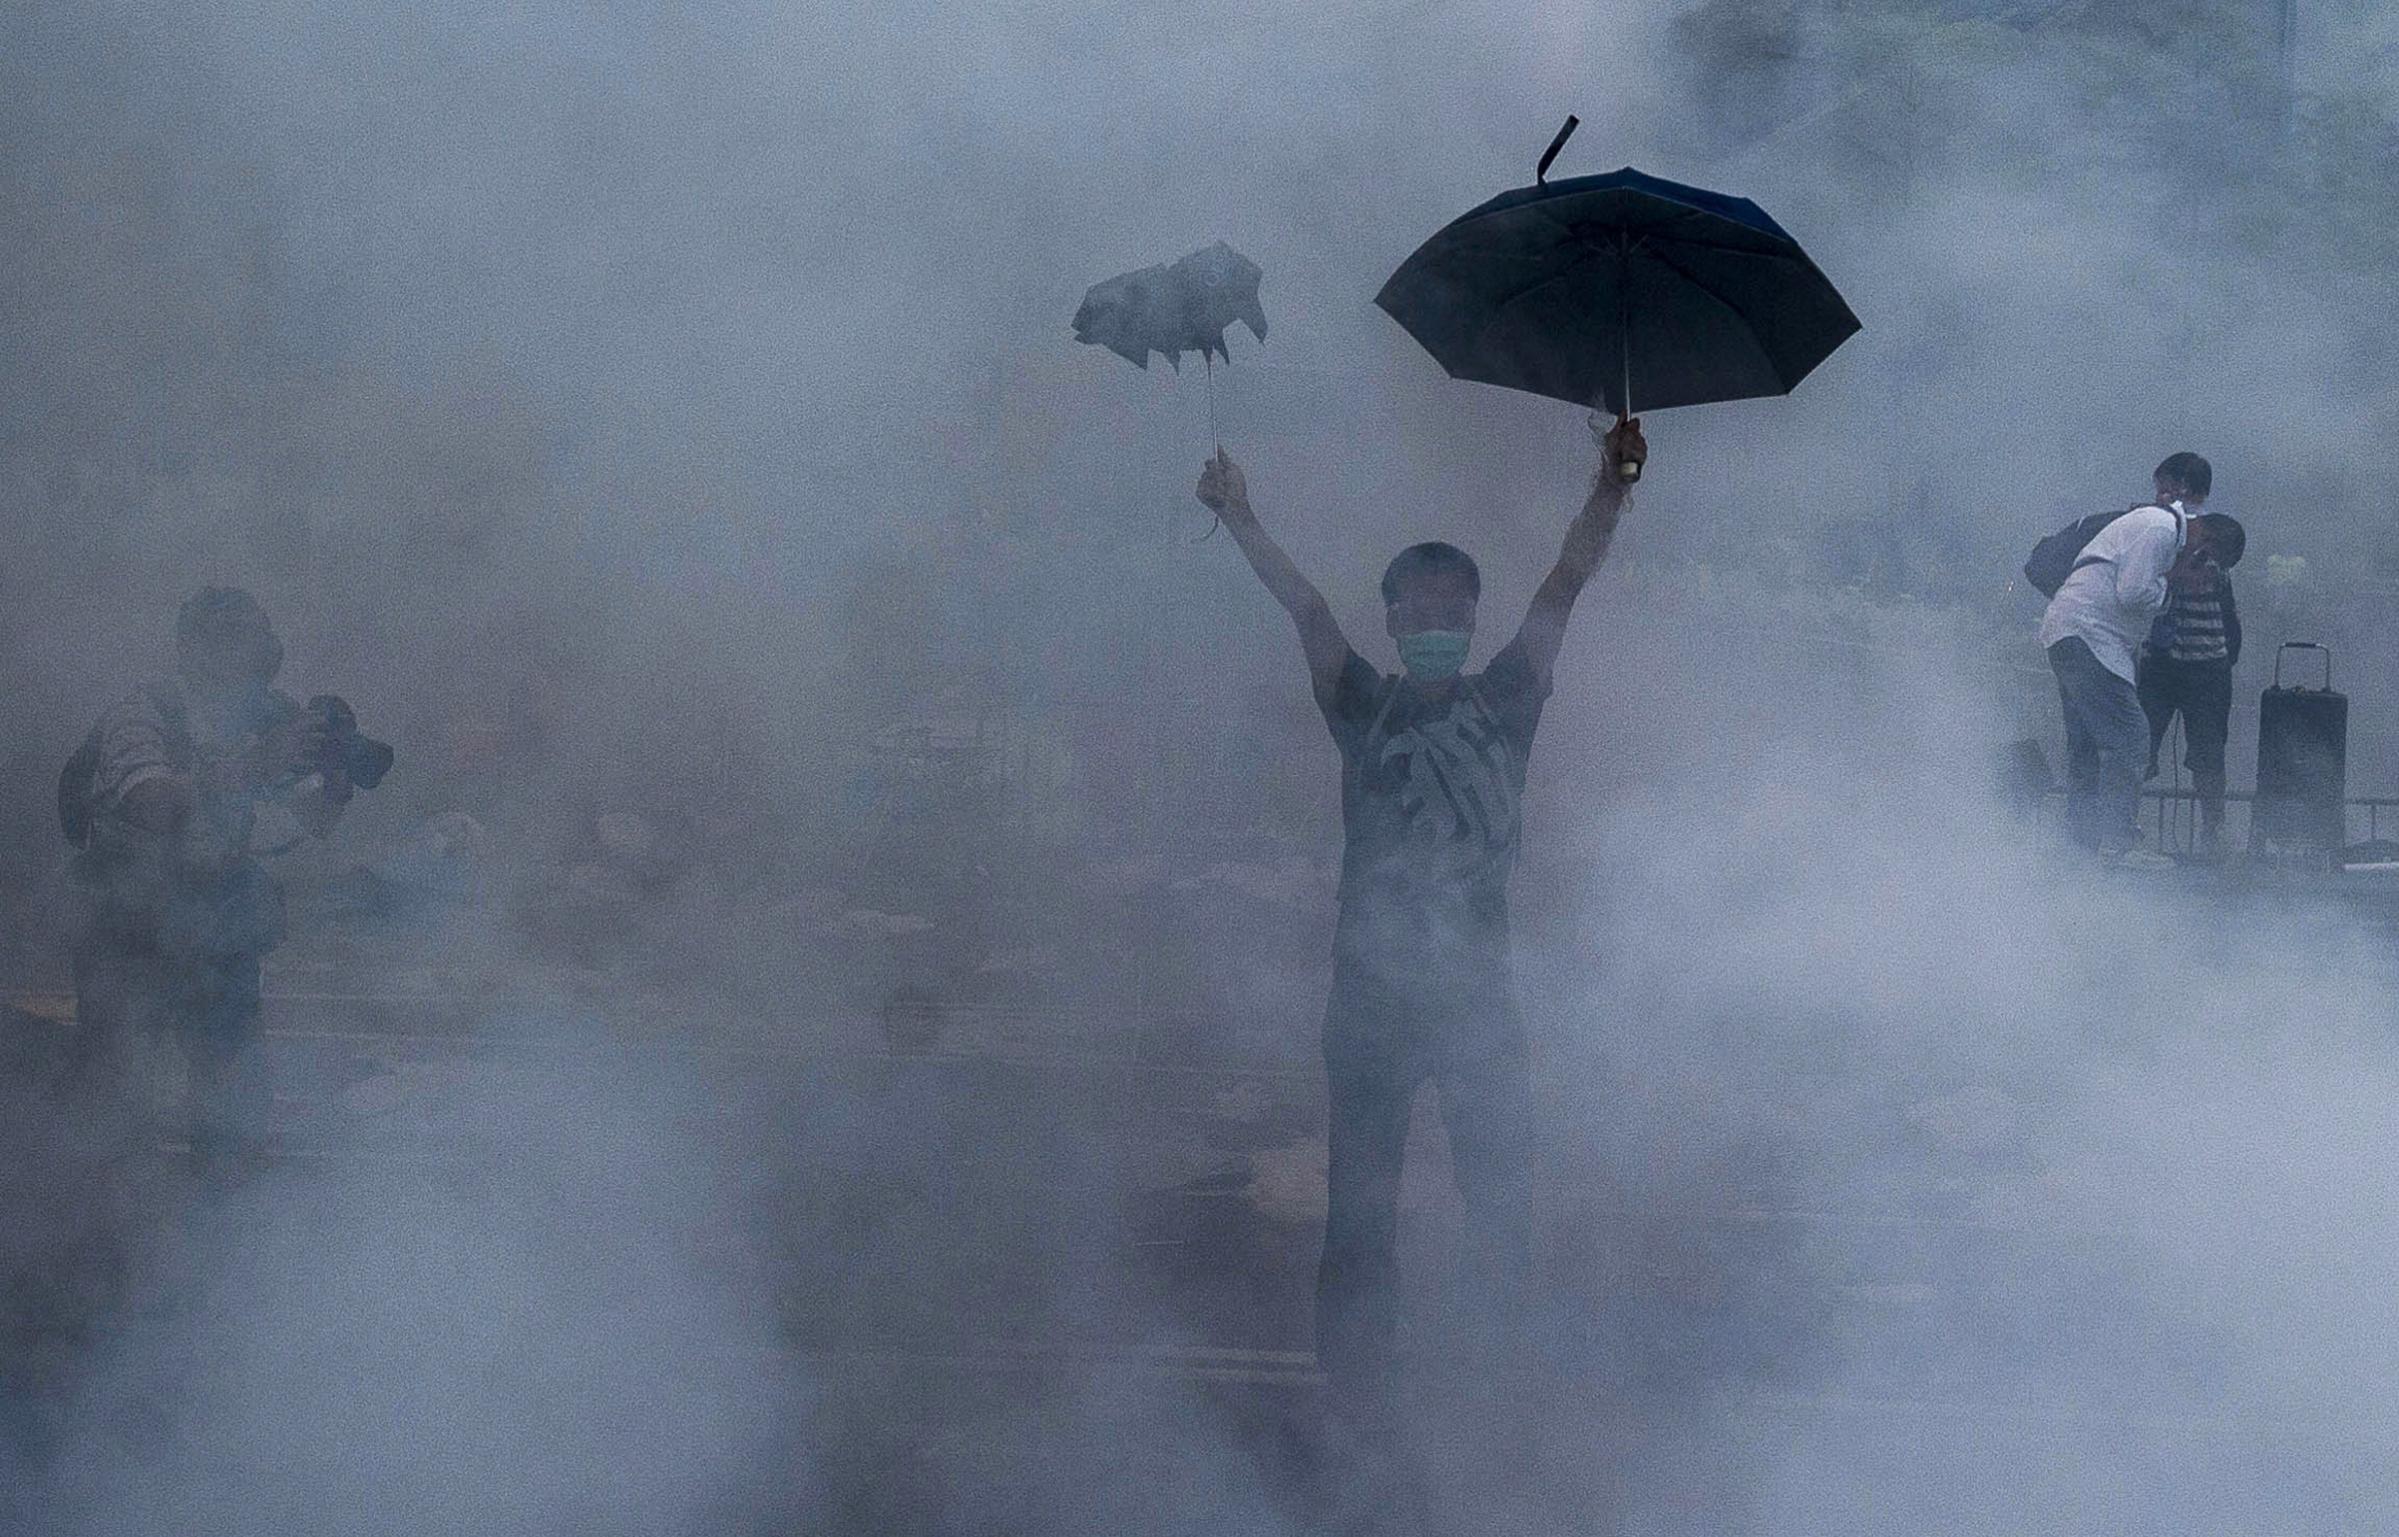 A pro-democracy demonstrator gestures after police fired tear gas towards protesters near the Hong Kong government headquarters on Sept. 28, 2014.